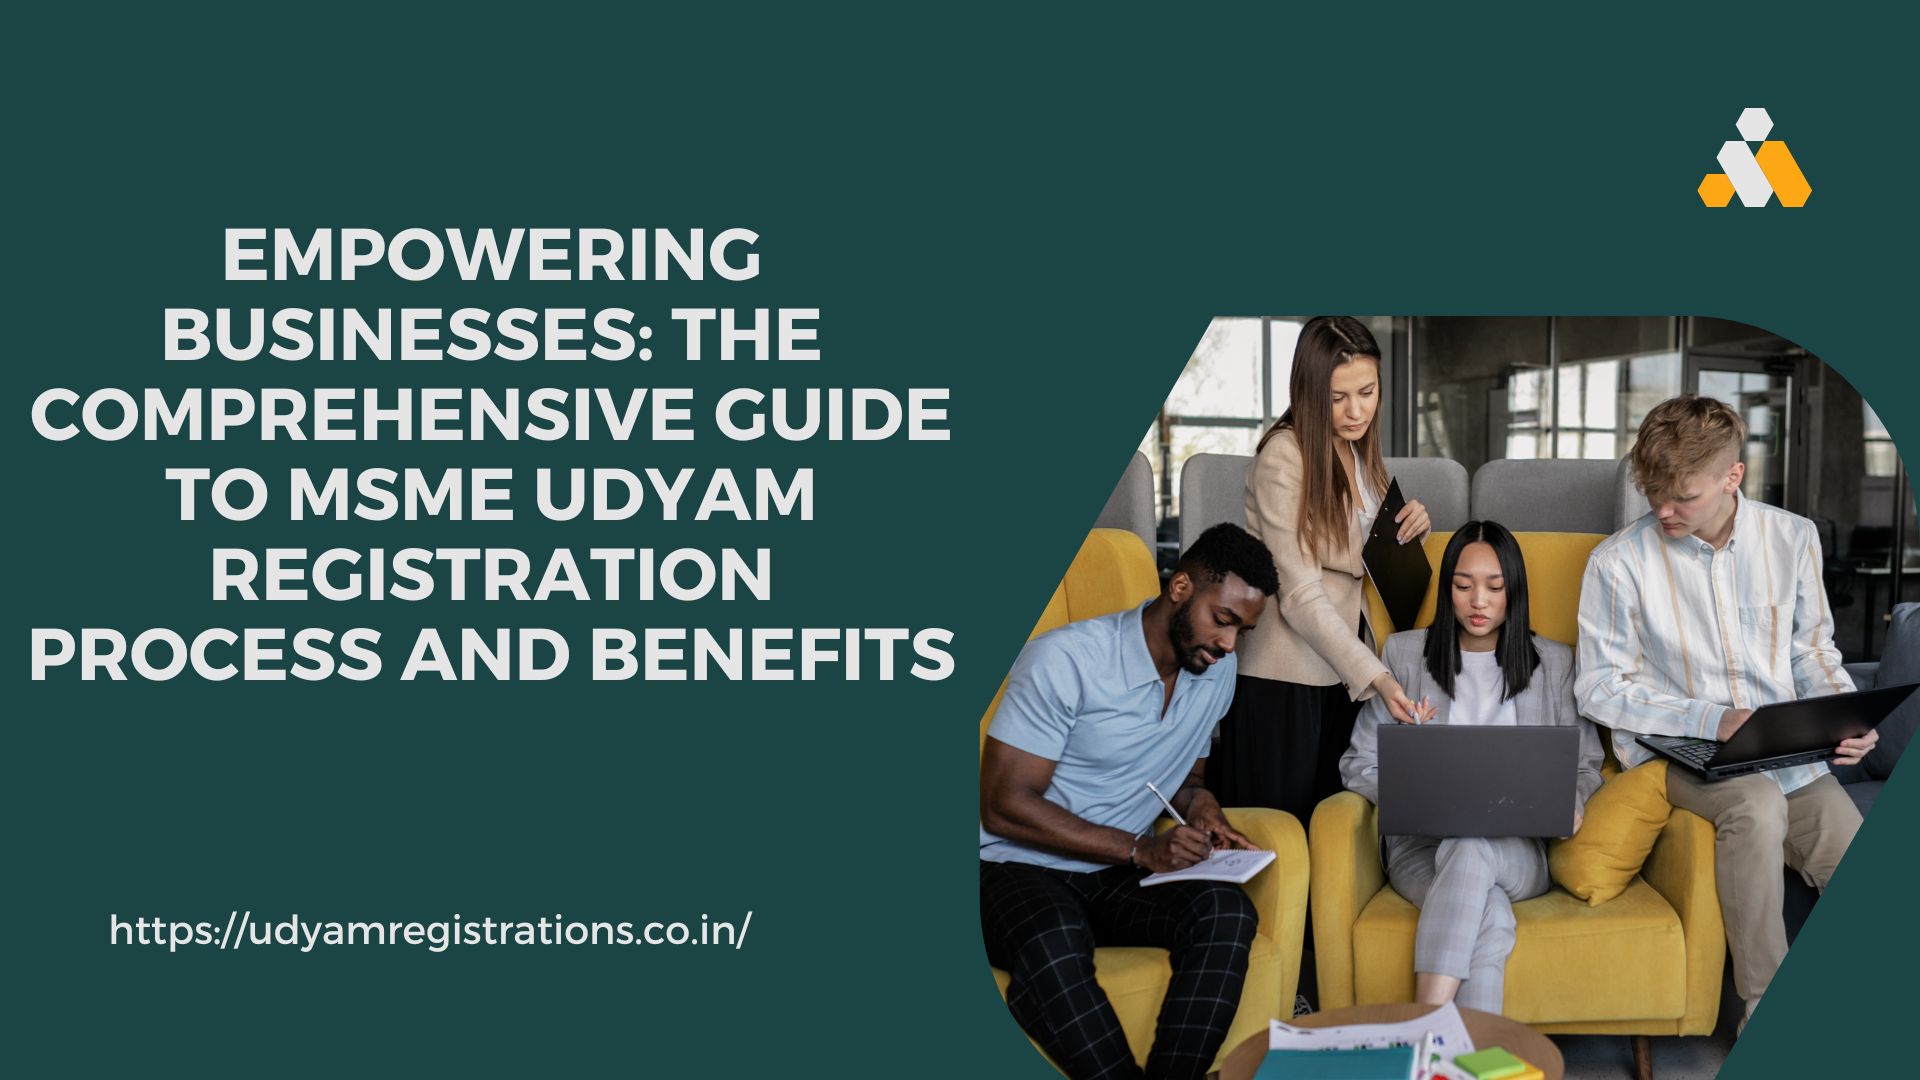 Empowering Businesses: The Comprehensive Guide to MSME Udyam Registration Process and Benefits